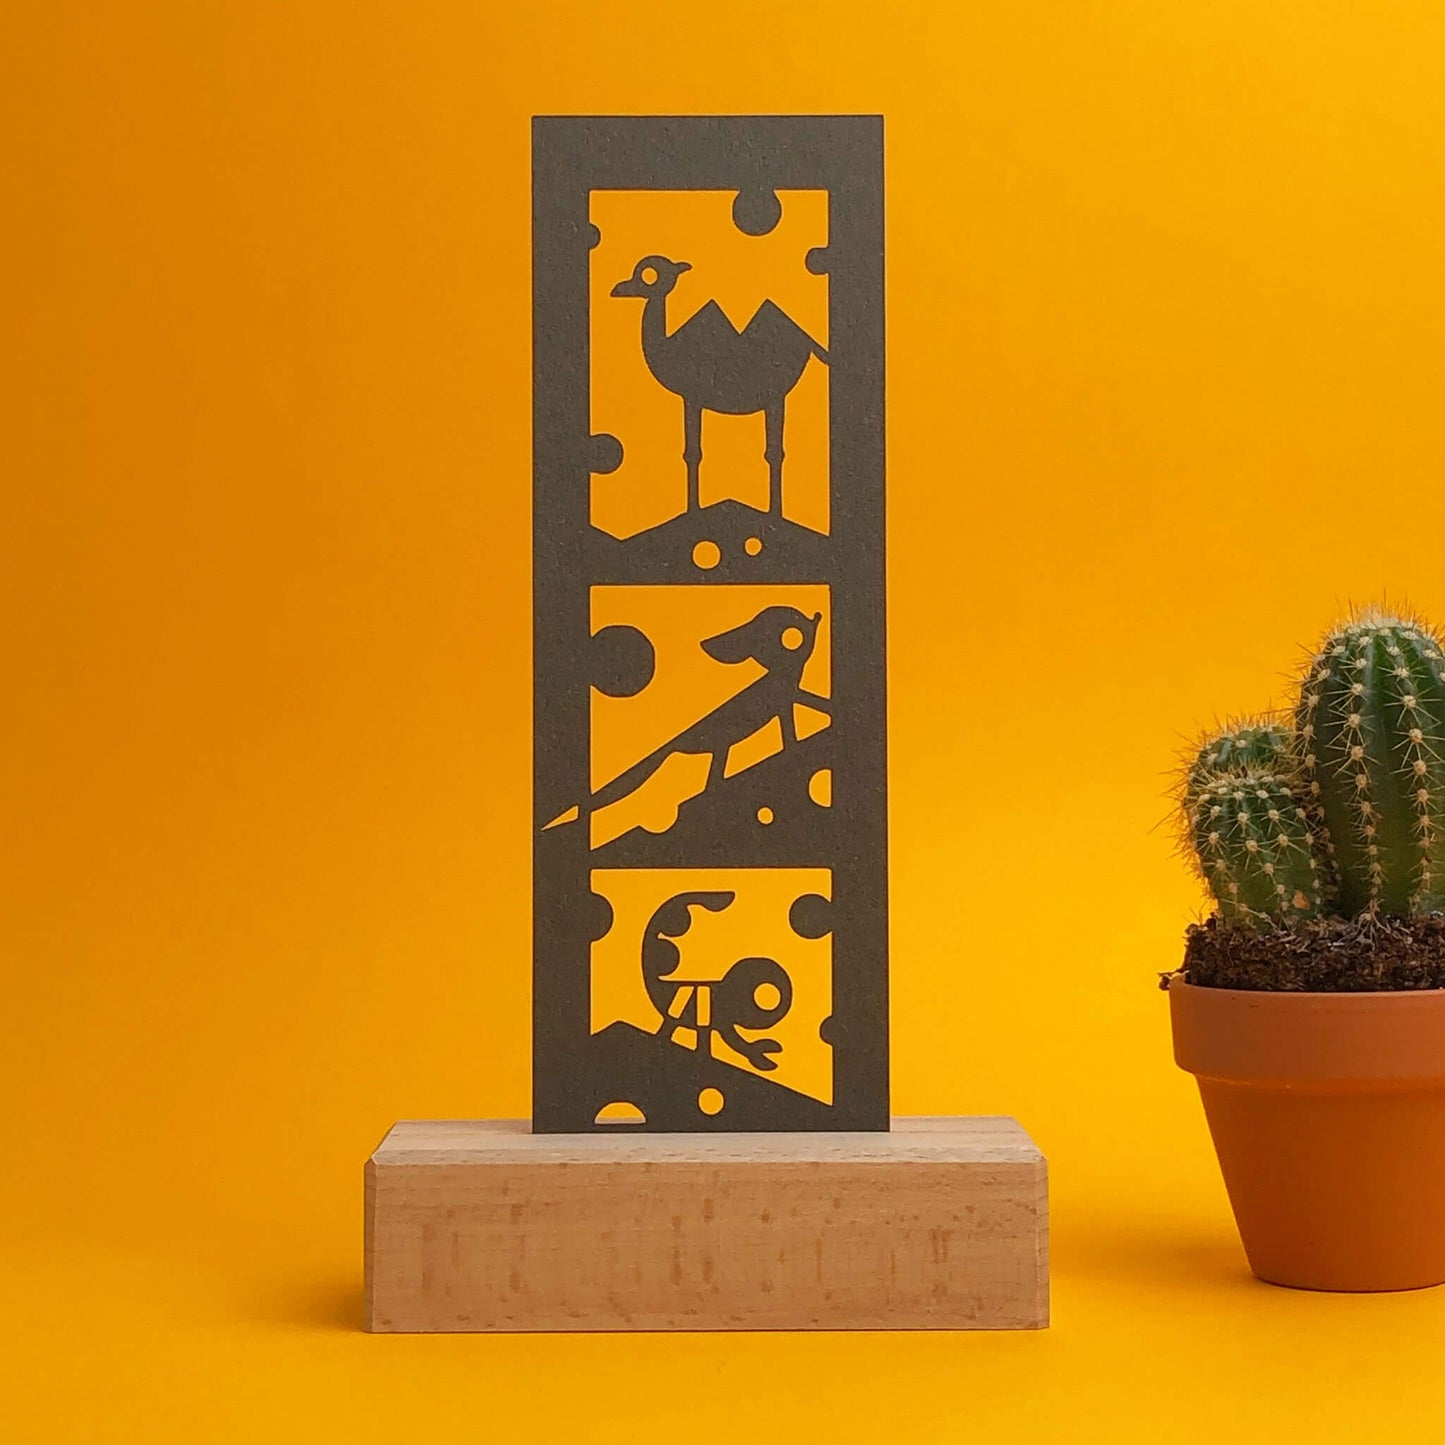  Wooden art display with paper bookmark cutouts of camel, fennec fox, and scorpion, accompanied by a small cactus in a terra cotta pot. Against an orange and yellow background.